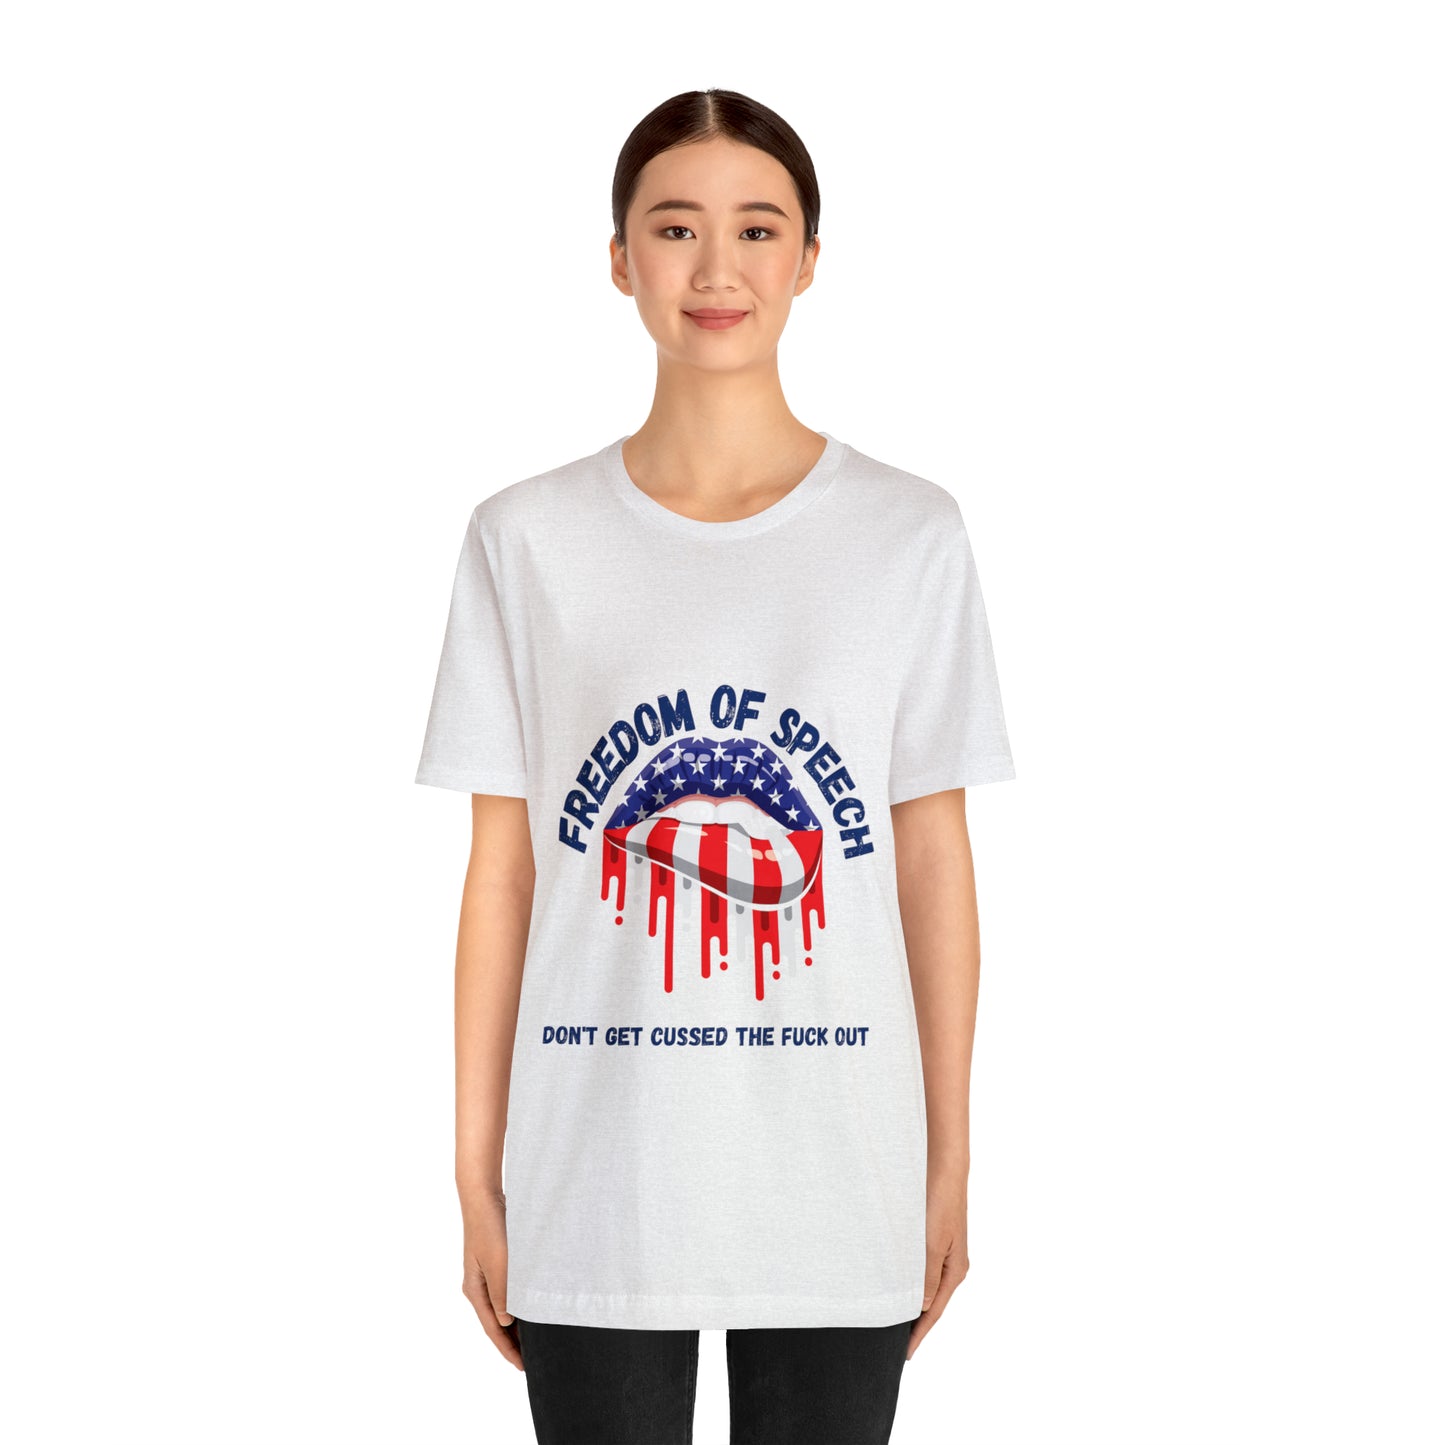 INDEPENDENCE DAY, Freedom of Speech, Unisex Jersey Short Sleeve Tee